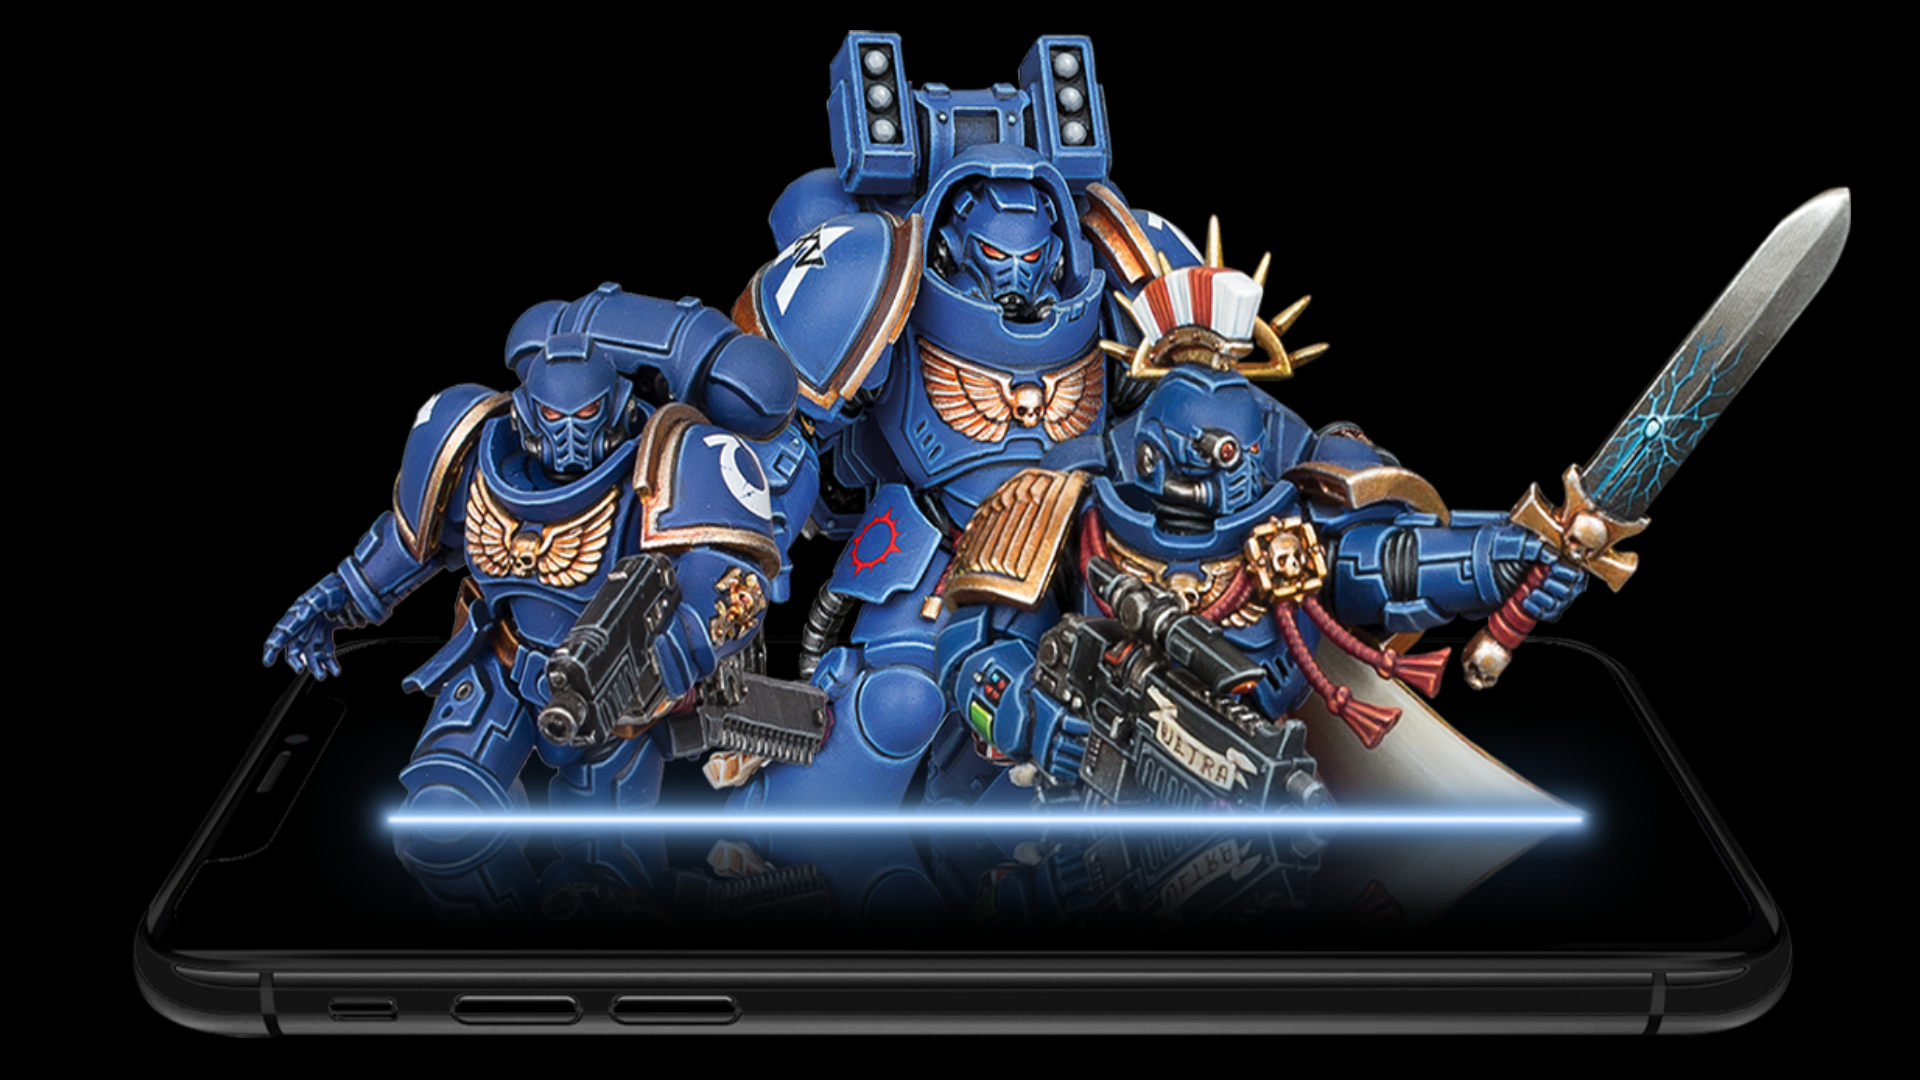 Image for Warhammer 40,000’s mobile app adds army building with Battle Forge beta